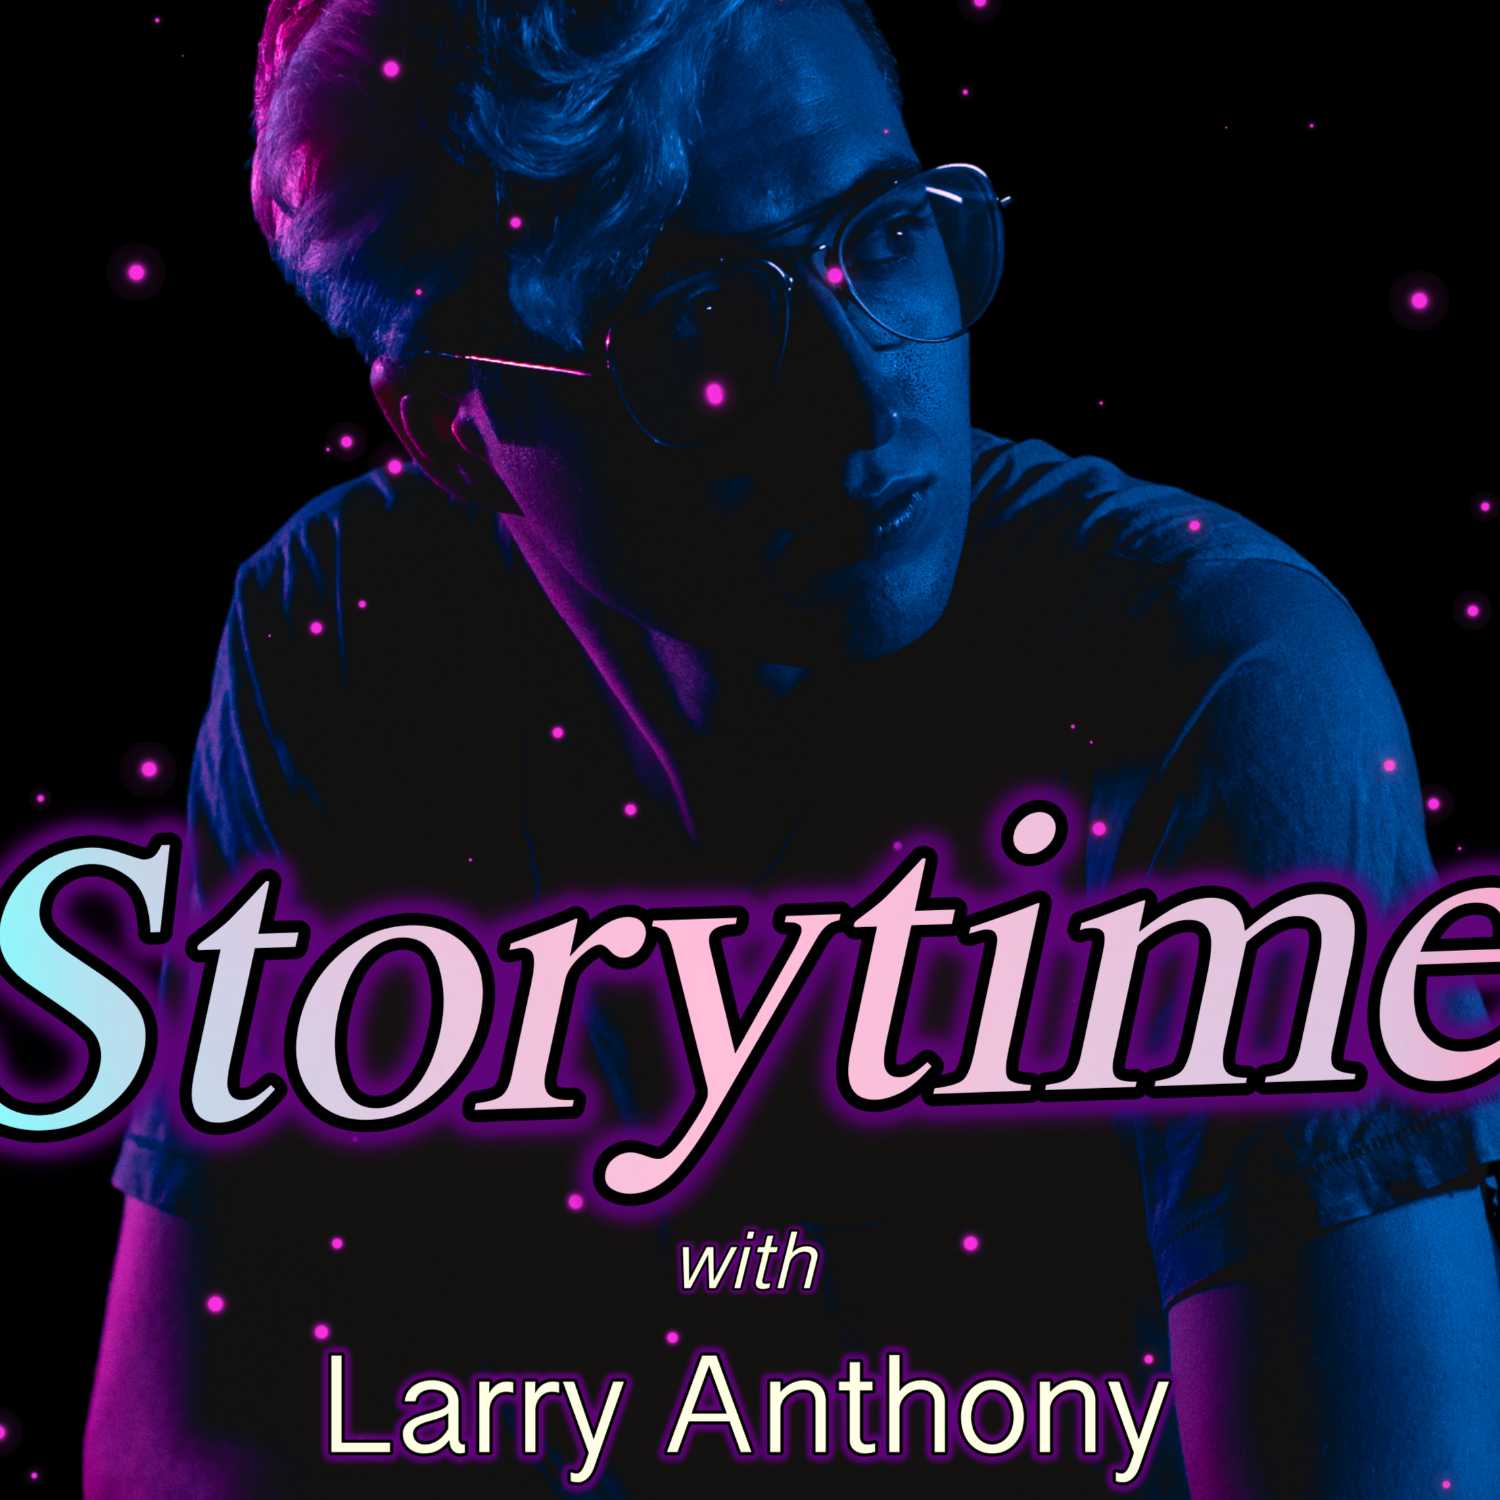 Storytime with Larry Anthony